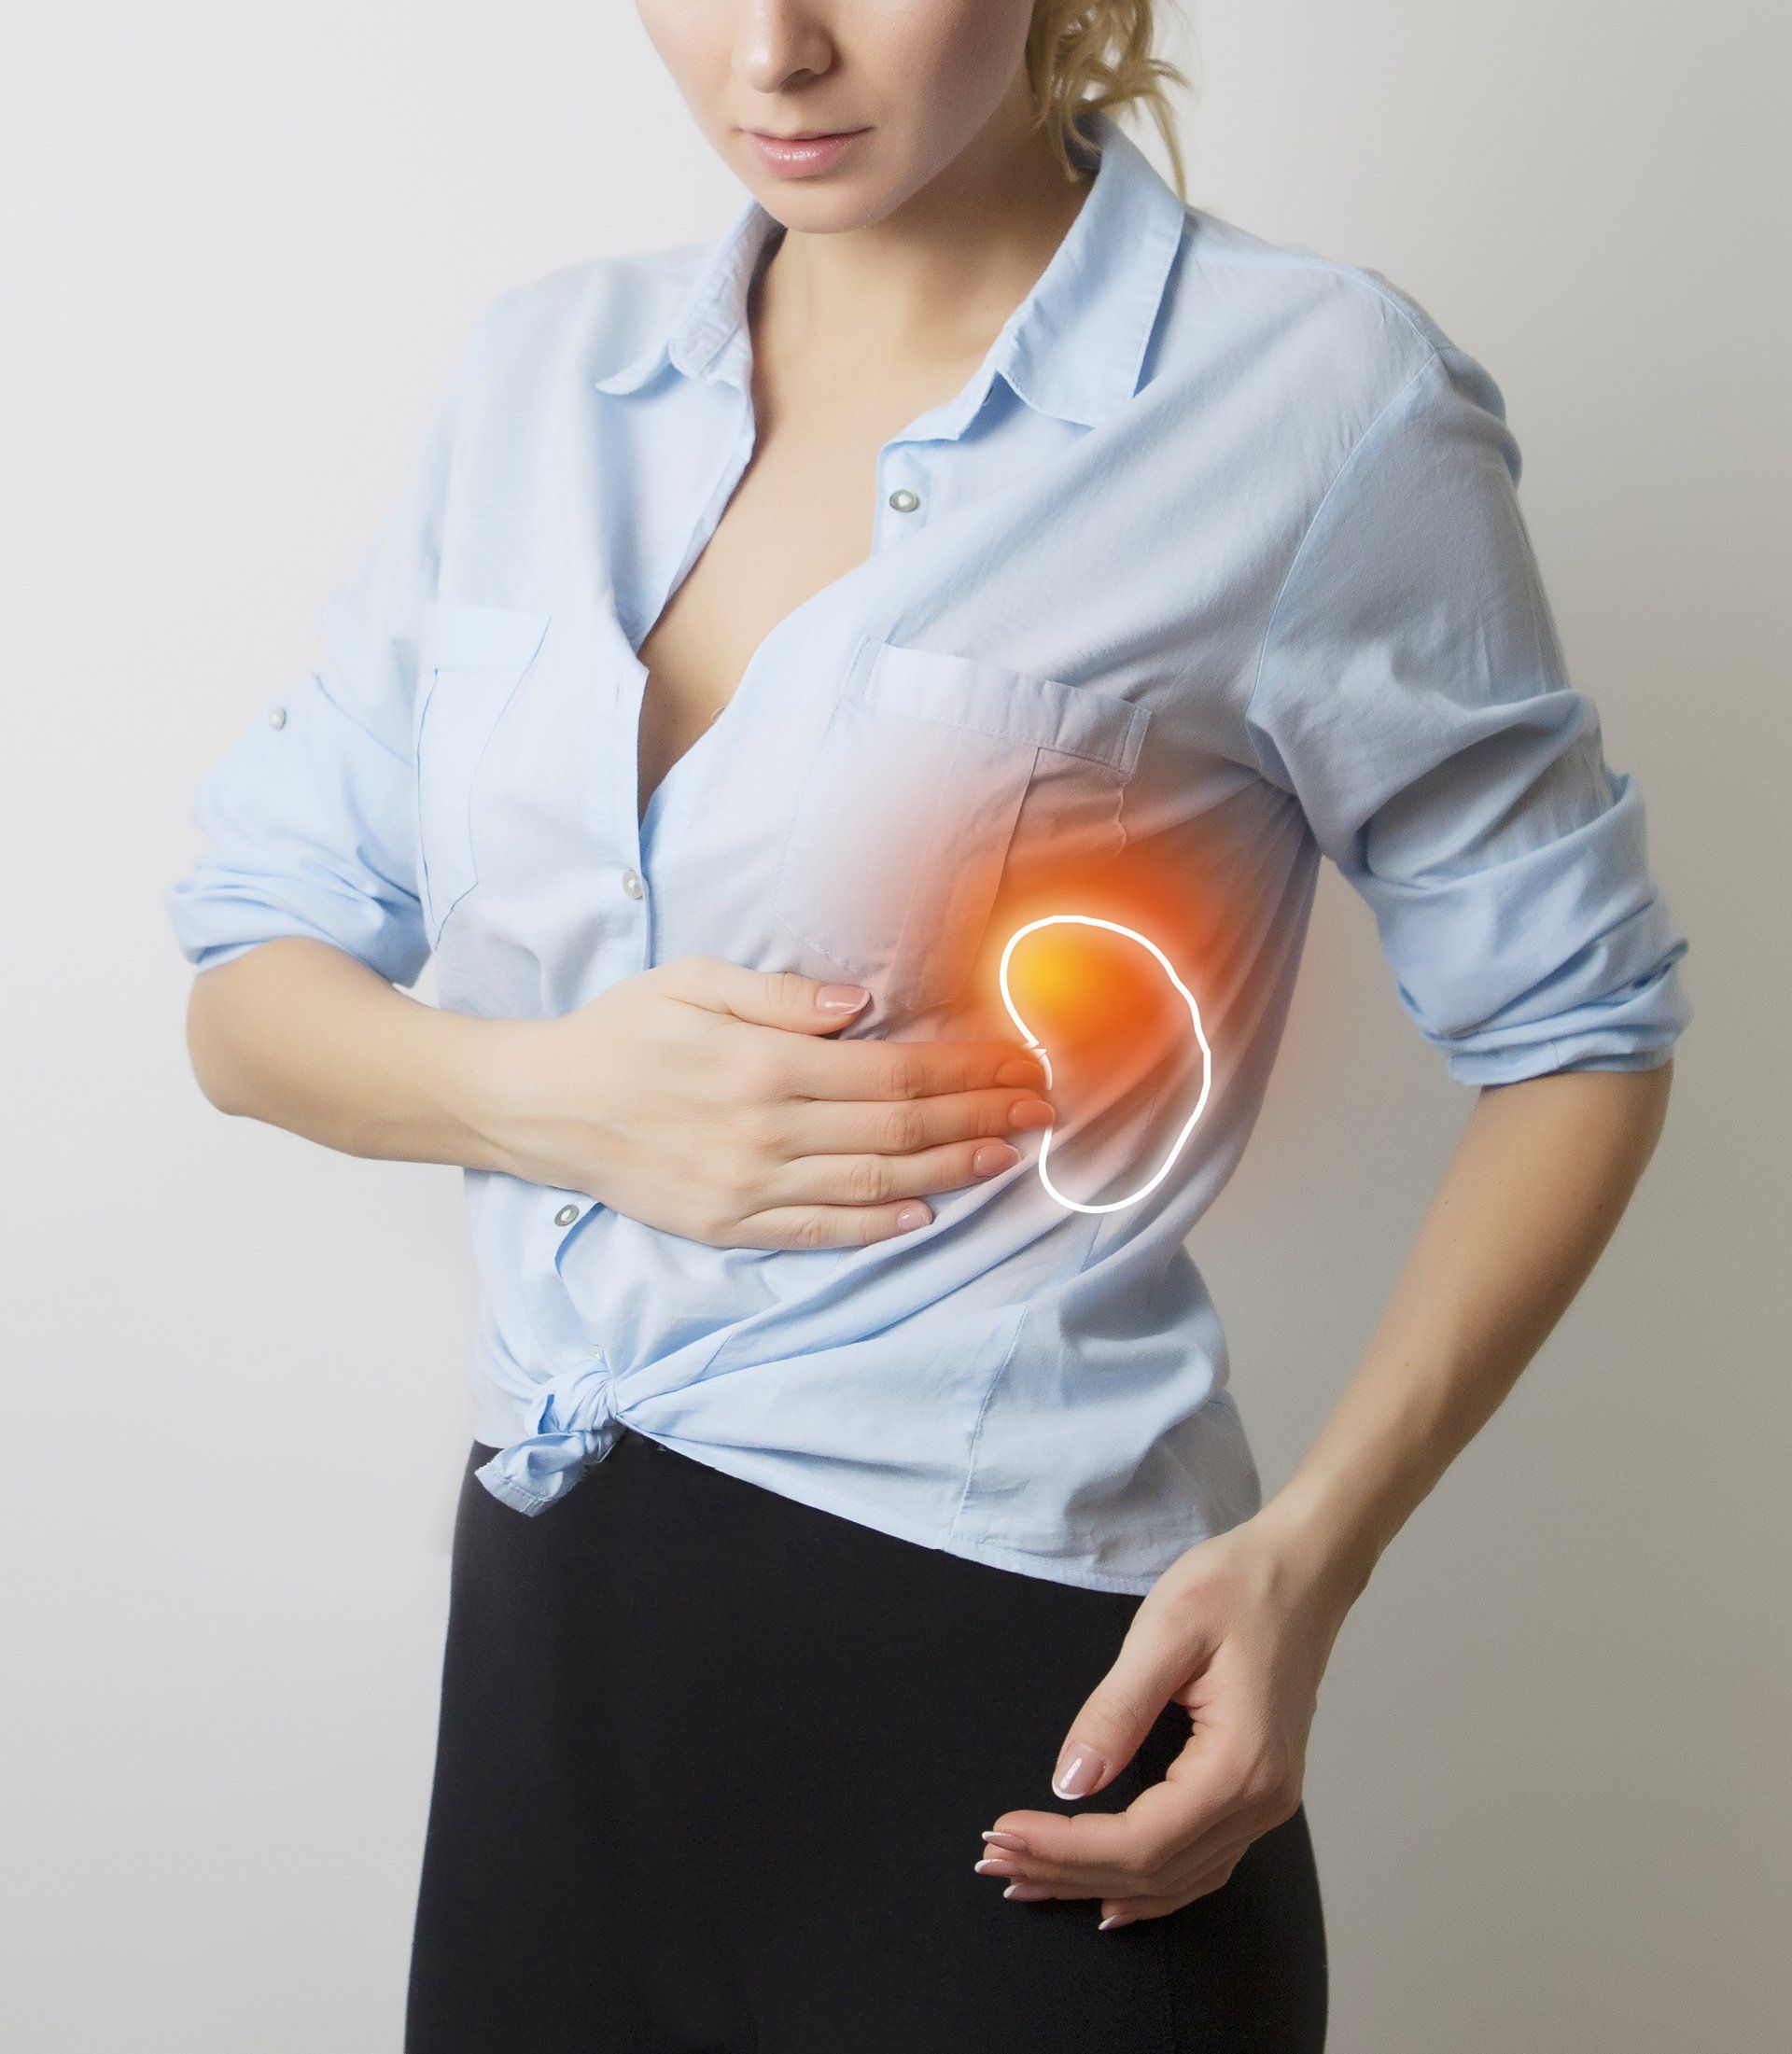 Signs Causes And Treatments Of An Enlarged Spleen